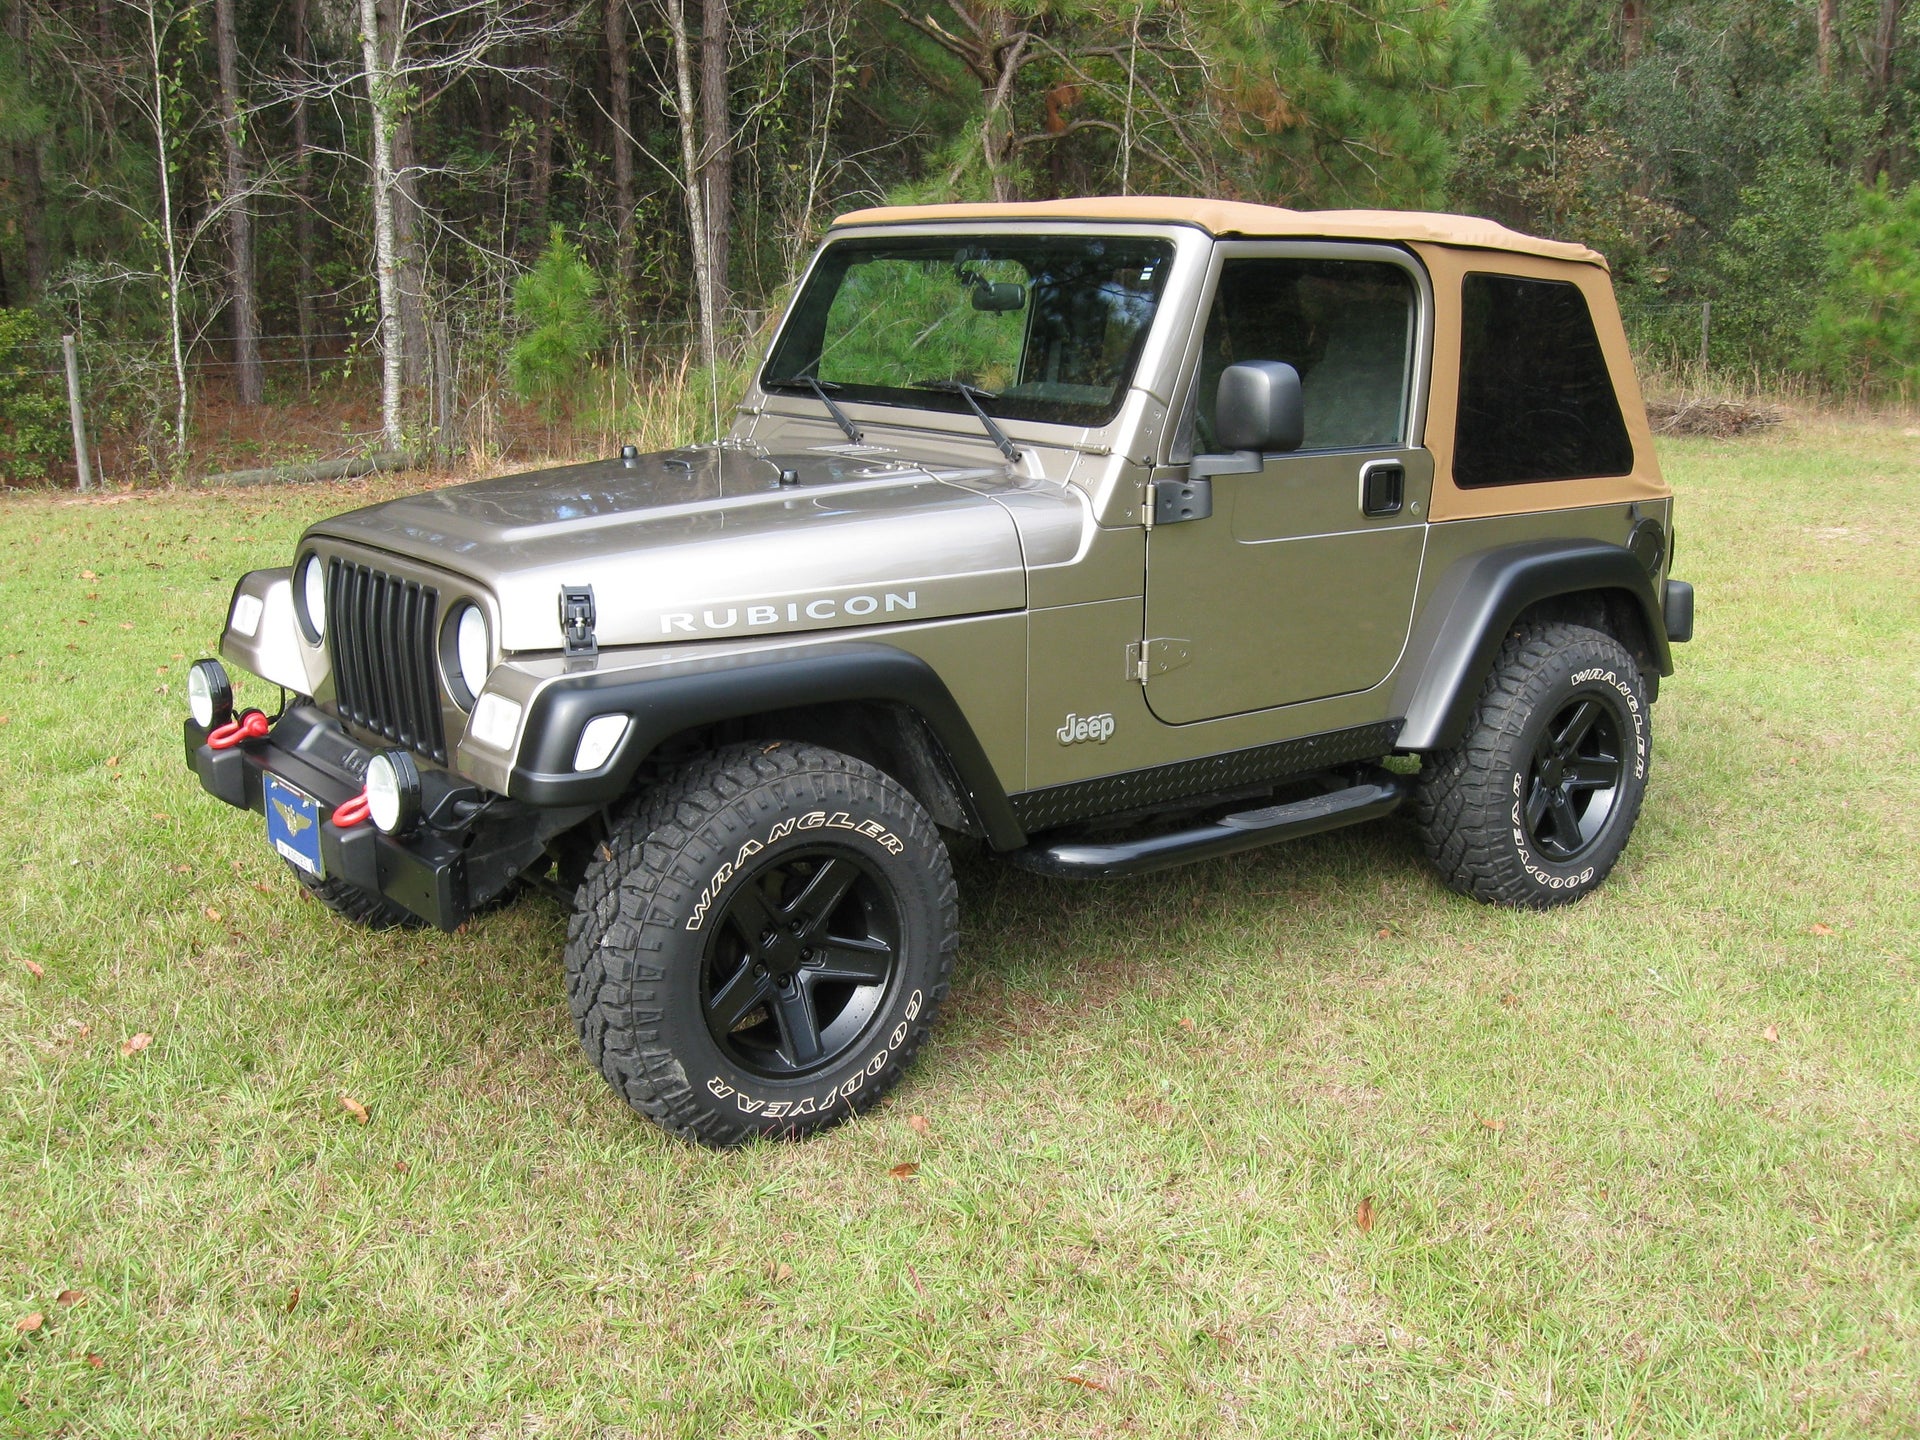 To snorkel or not to snorkel | Jeep Wrangler Forum